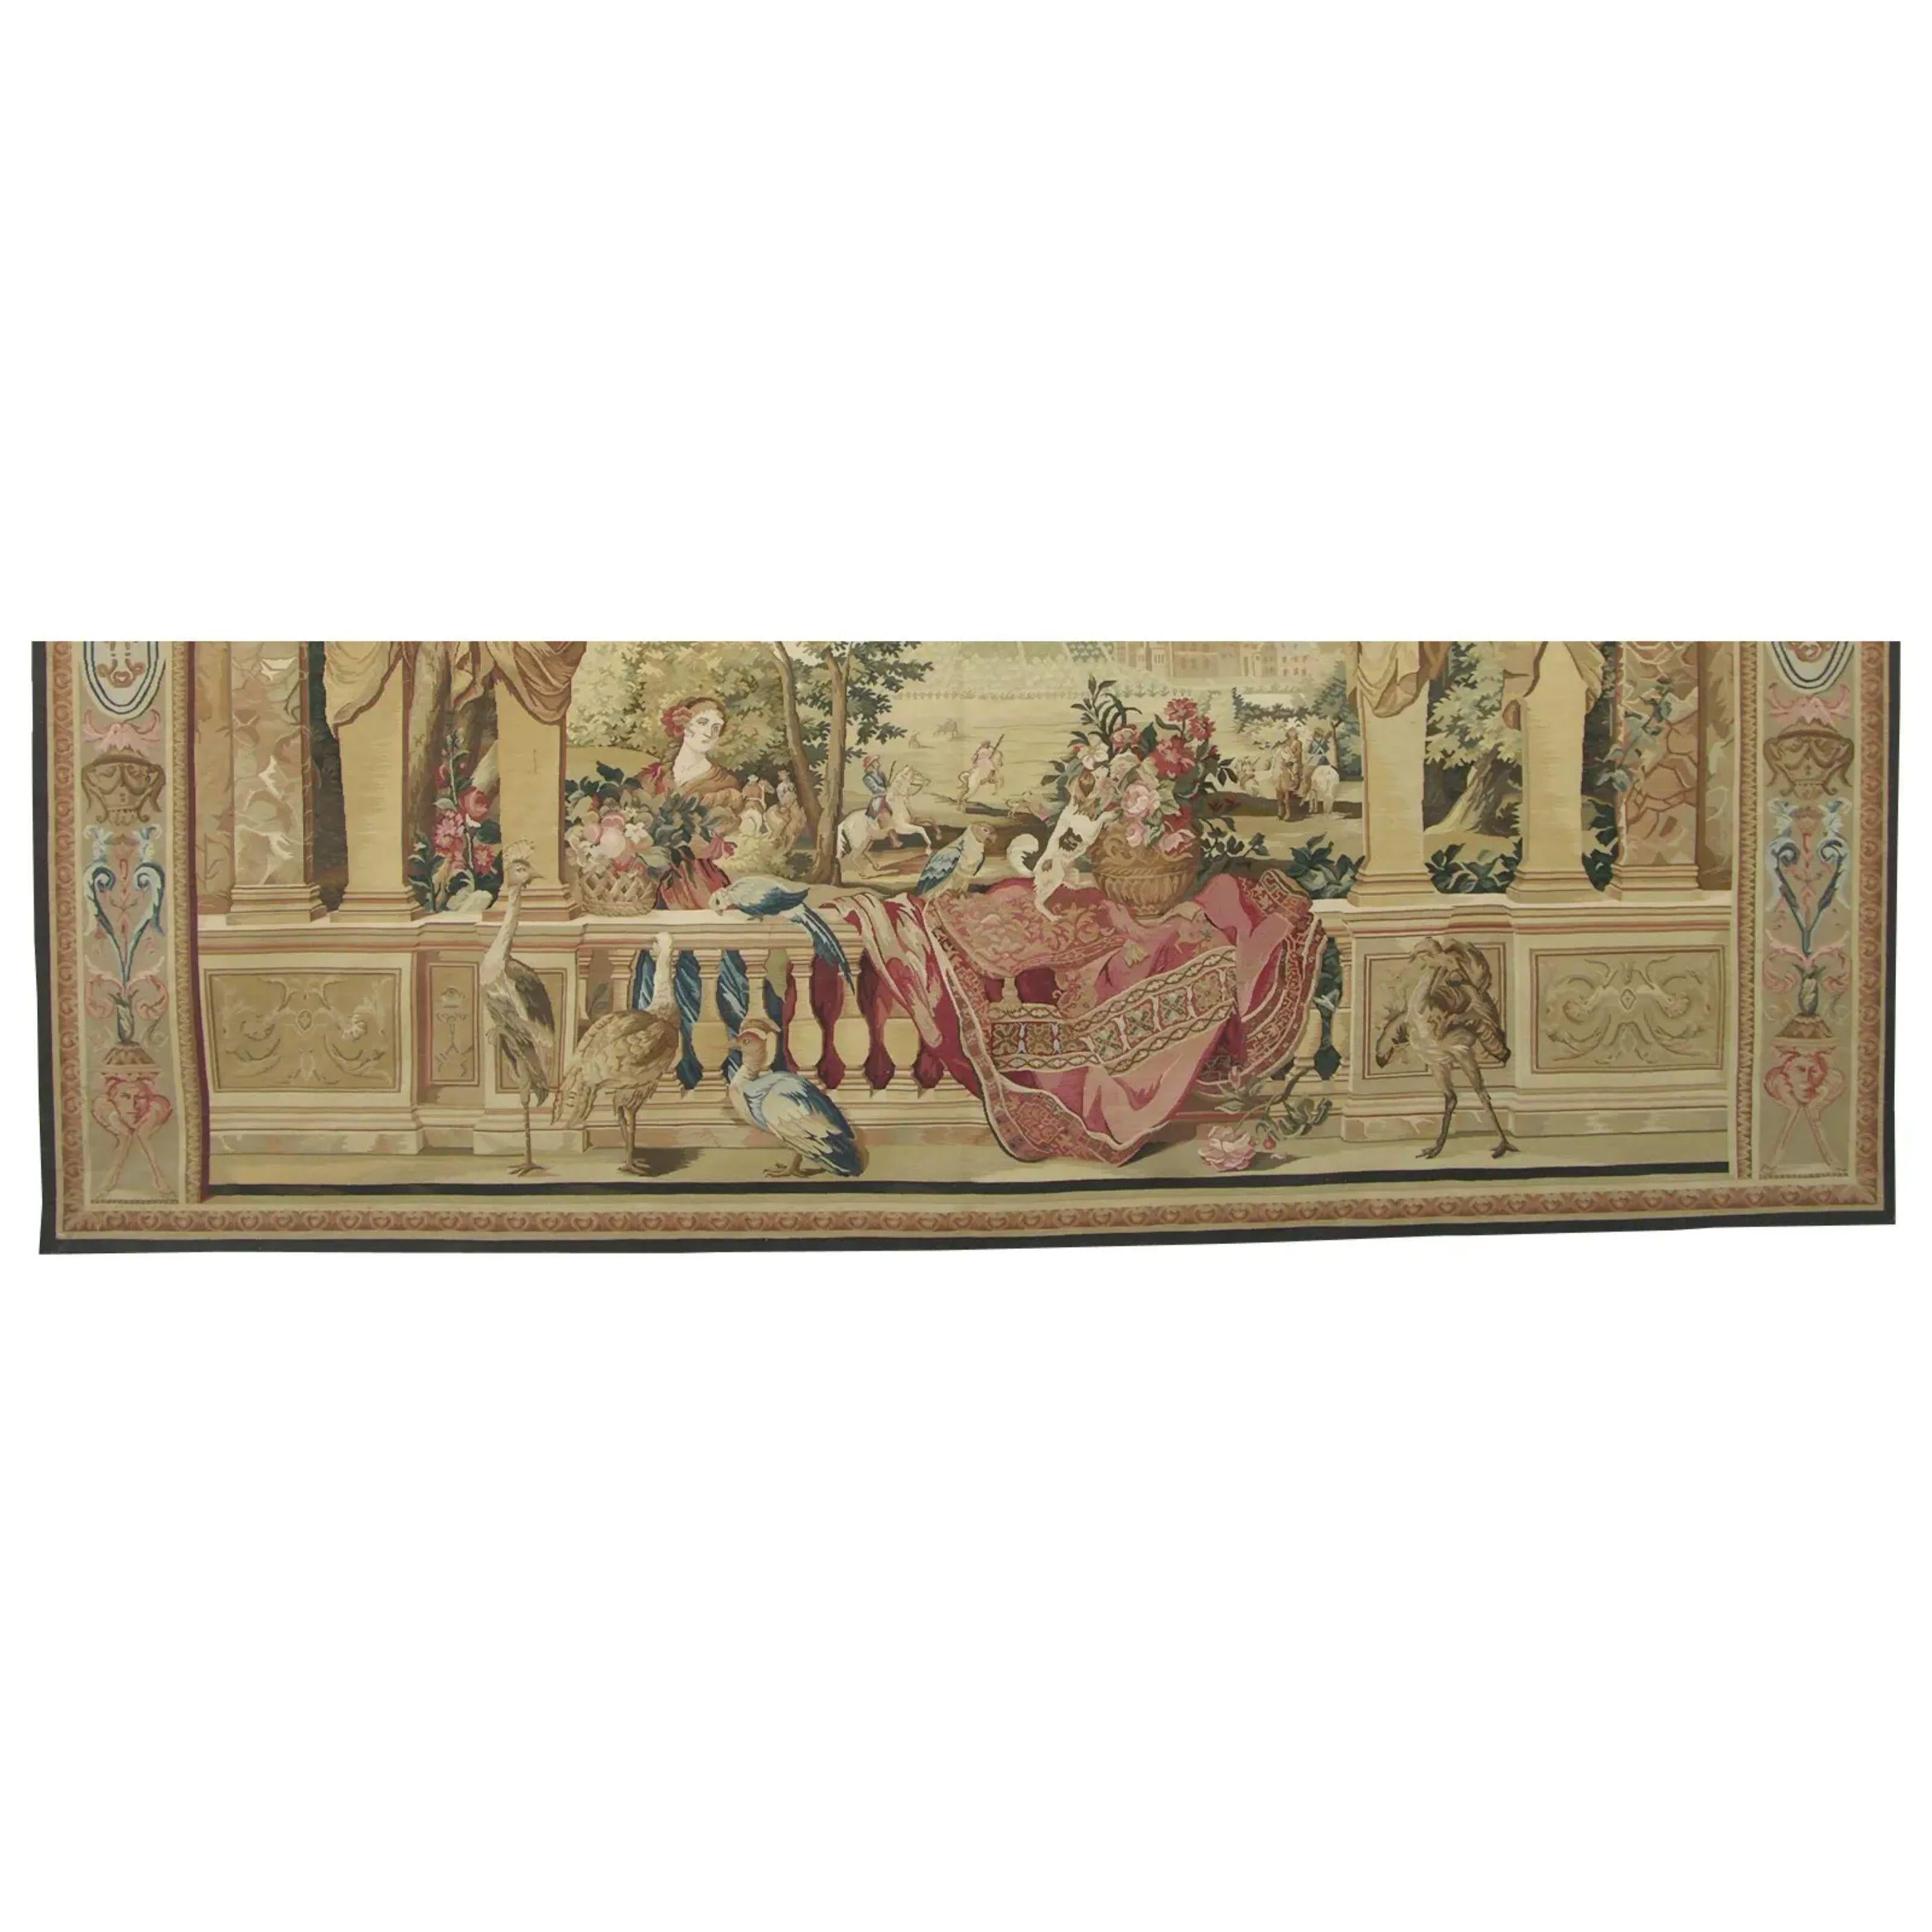 Unknown Vintage Tapestry Depicting Royal Figures 9.9X6.4 For Sale